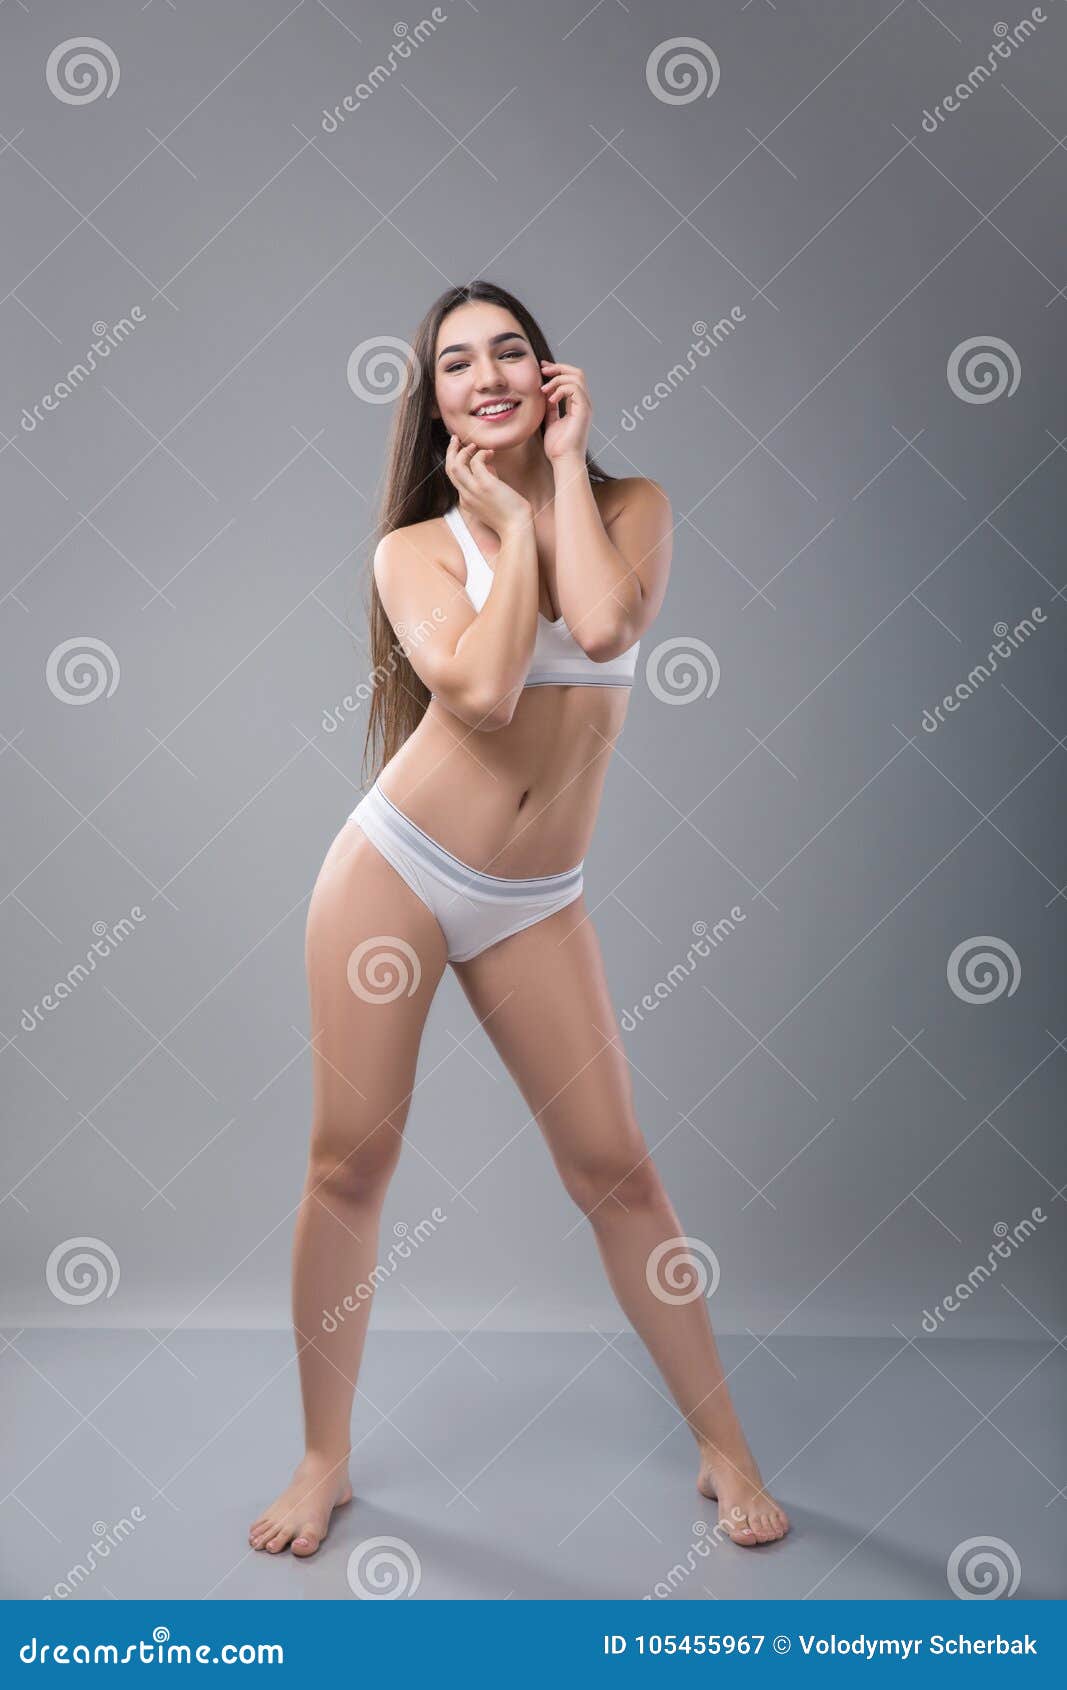 Beautiful Plump Woman or Plus Size Model in the Sports Underwear on a Grey  Background Stock Image - Image of sensual, smiling: 105455967